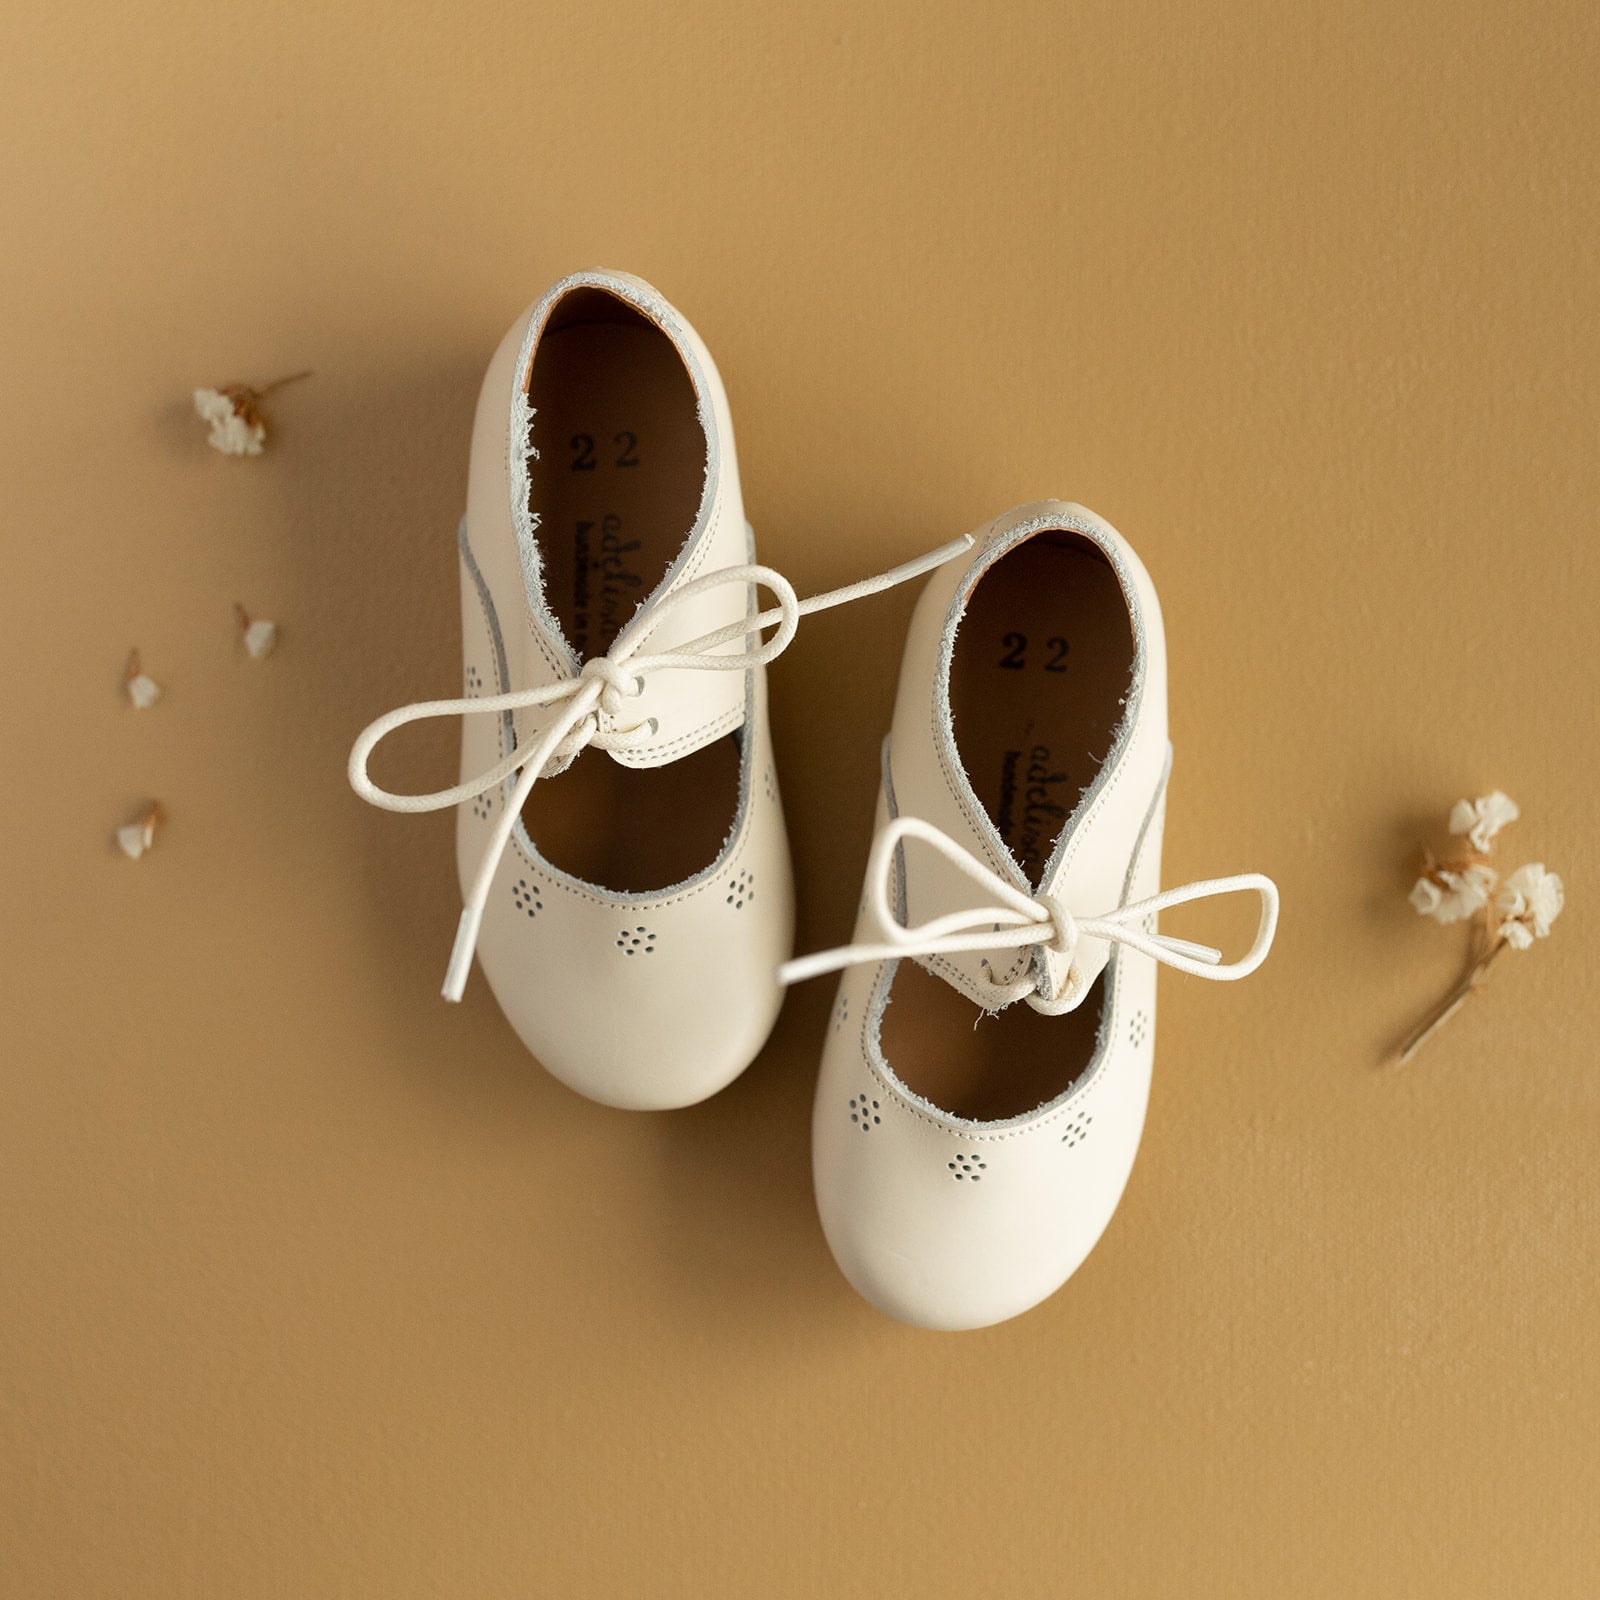 Adelisa &amp; Co cream leather Mary Jane shoes for girls. Style Sol Oxford Flats.